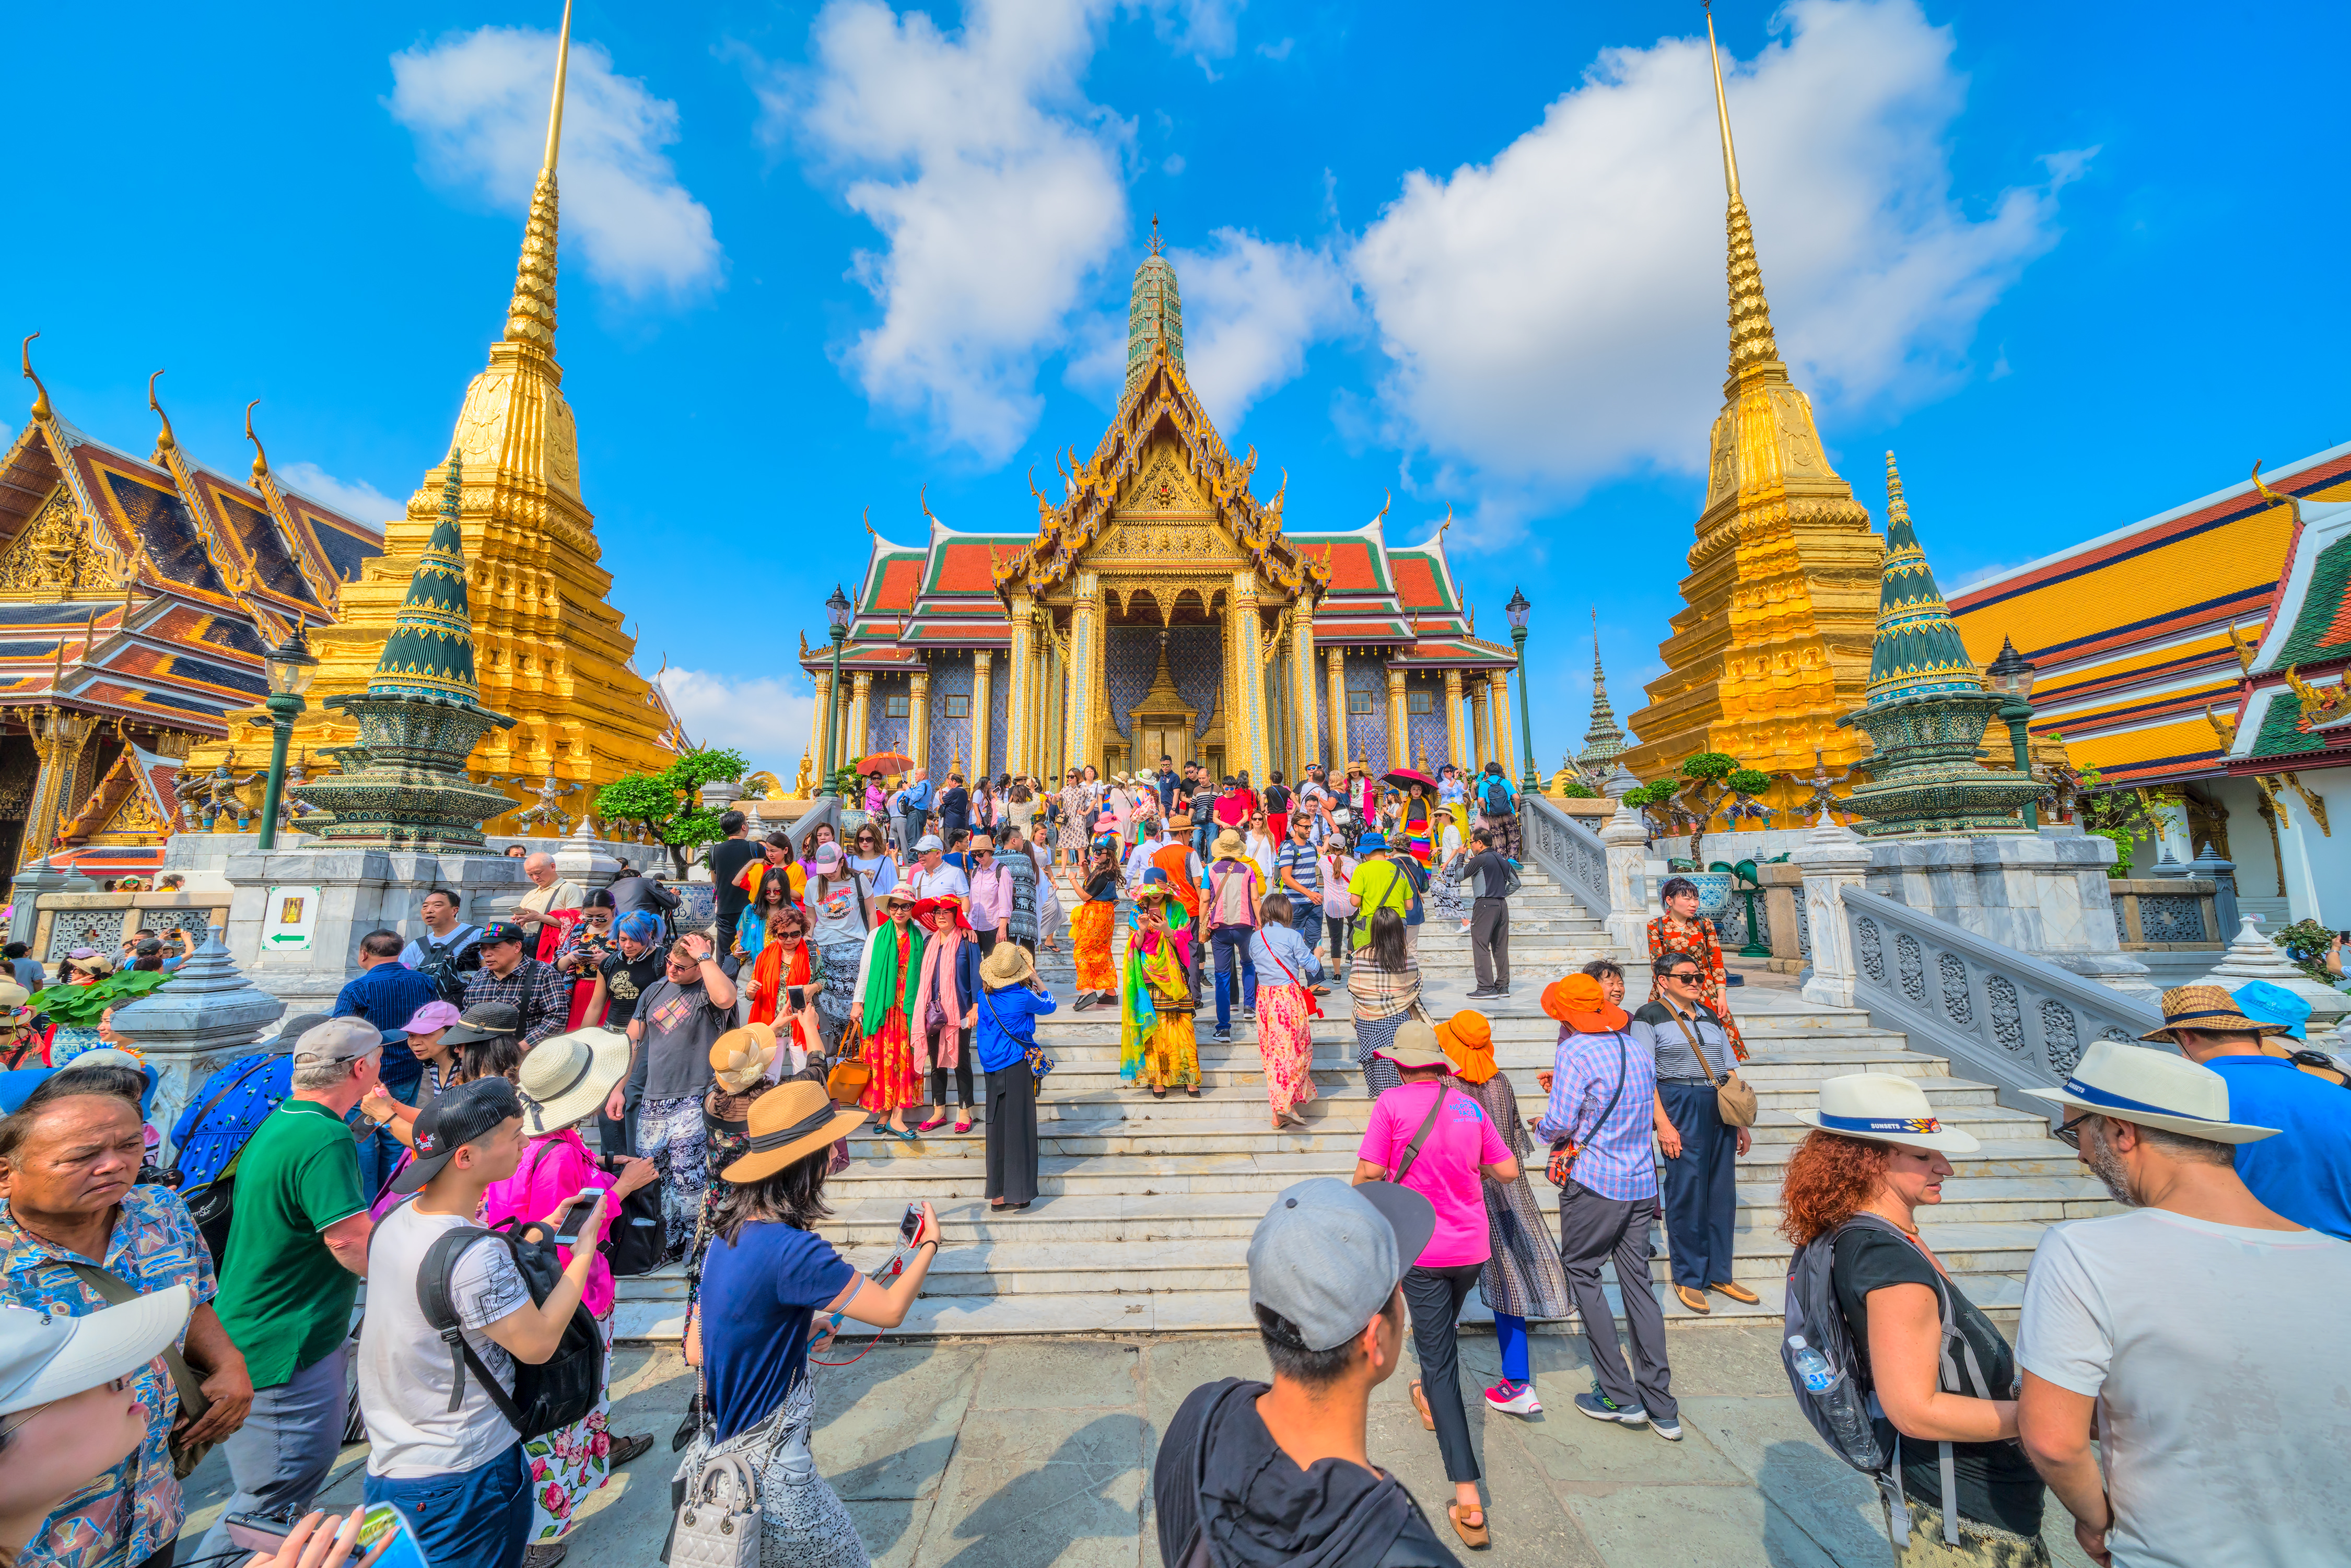 People mill around the complex of the Grand Palace in Bangkok as its golden spires pierce the blue skies.